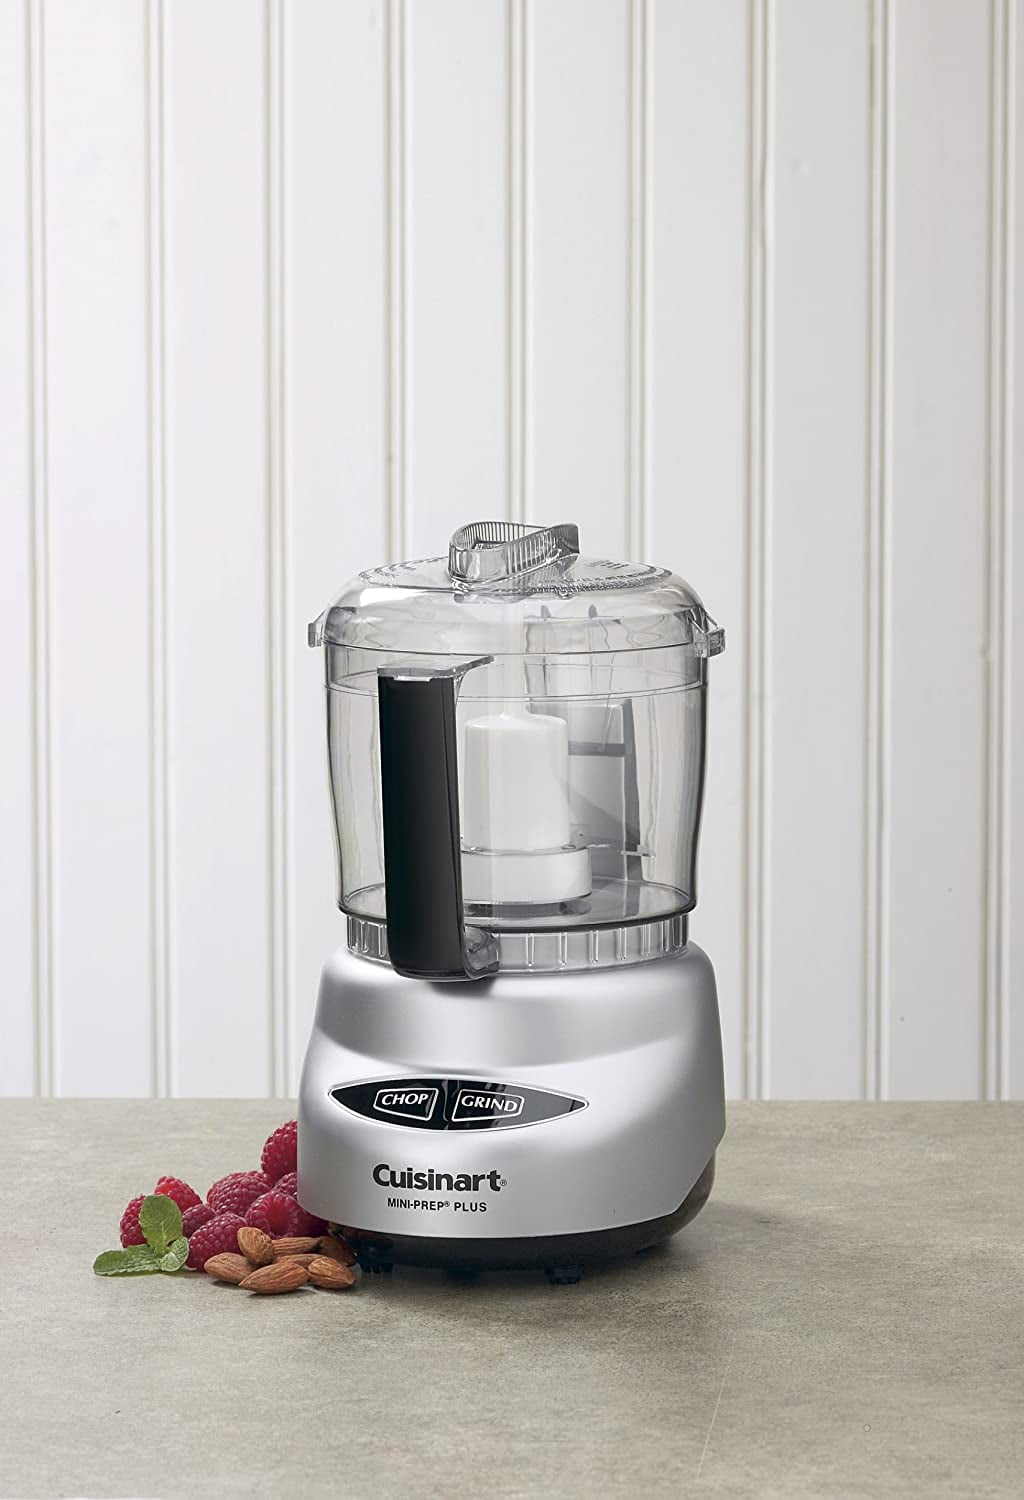  8 Cup Food Processor by Cuisinart, 350-Watt Motor, Medium to  Fine Slicing Discs, FP-8SV & DLC-2ABC Mini-Prep Plus 24-Ounce Food- Processors, 3 Cup, Brushed Chrome and Nickel : Home & Kitchen